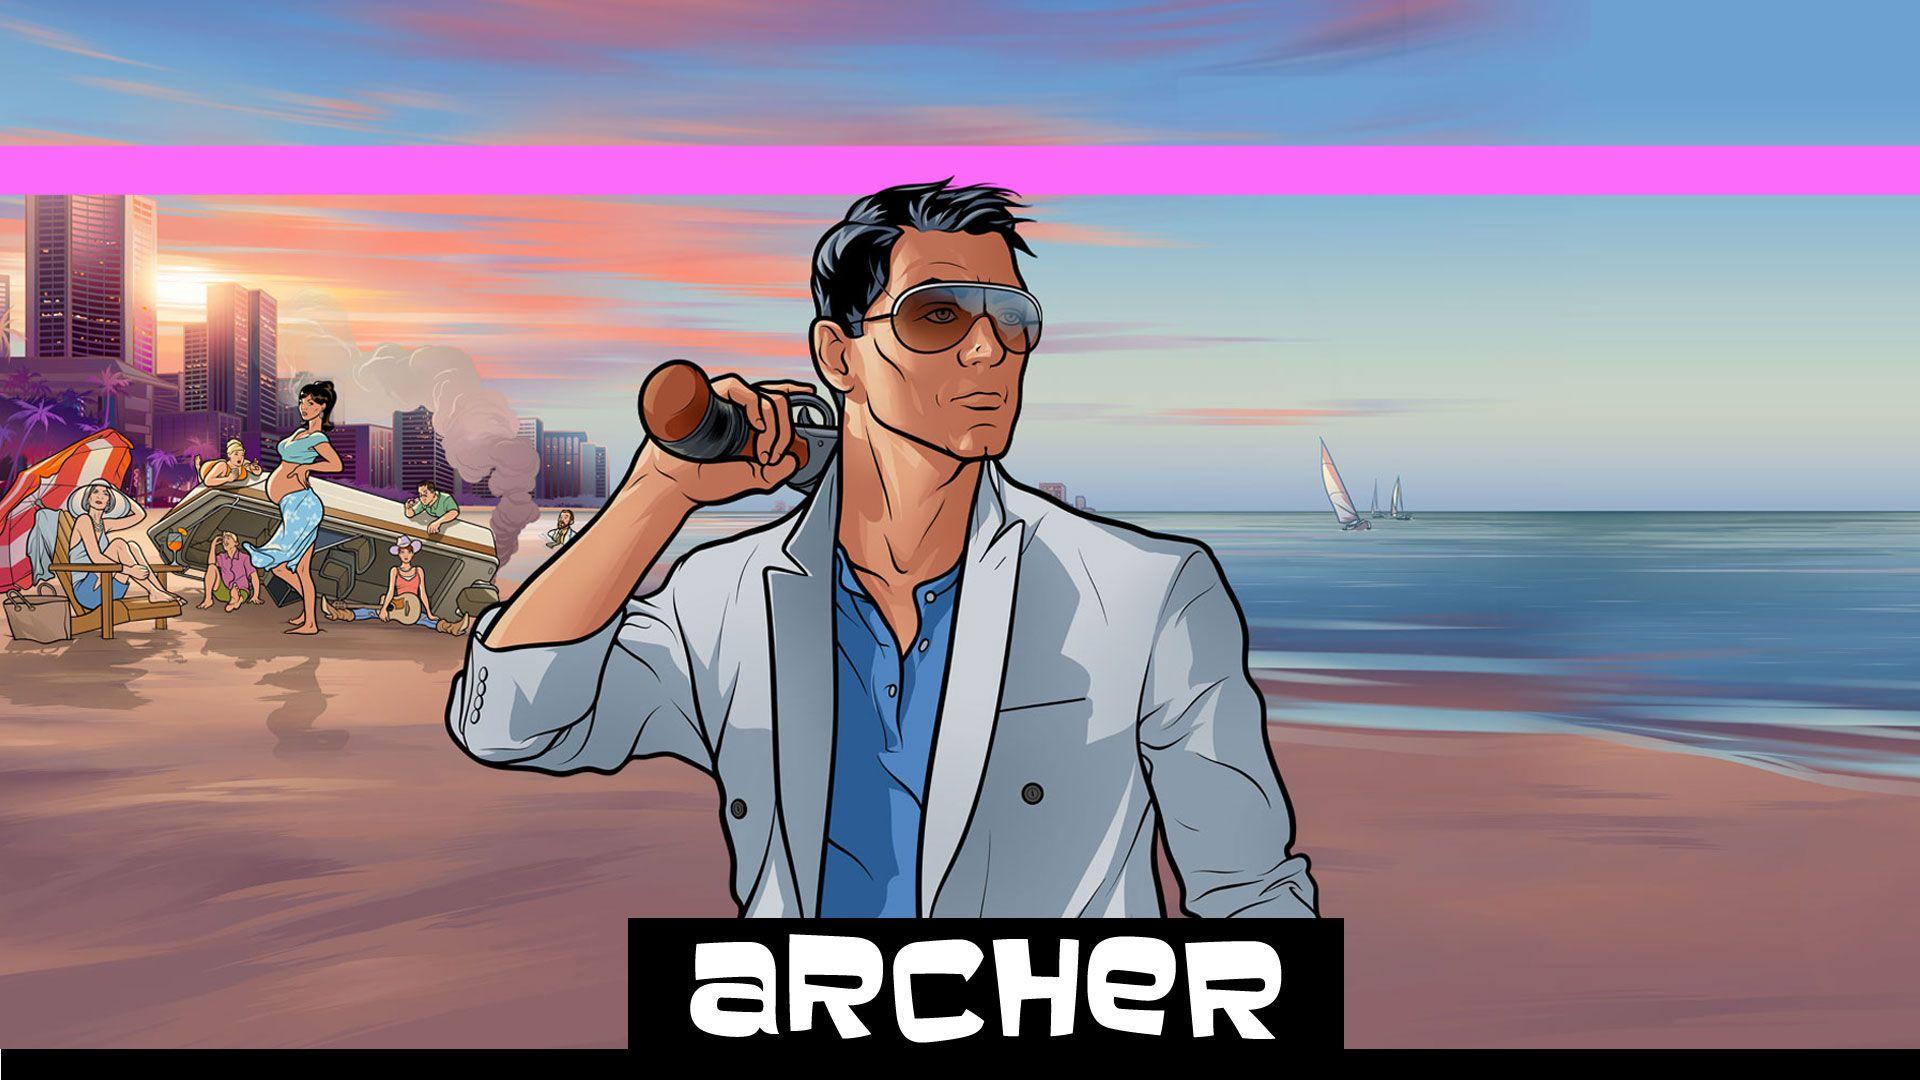 Rejoice: Archer Wallpapers are here.